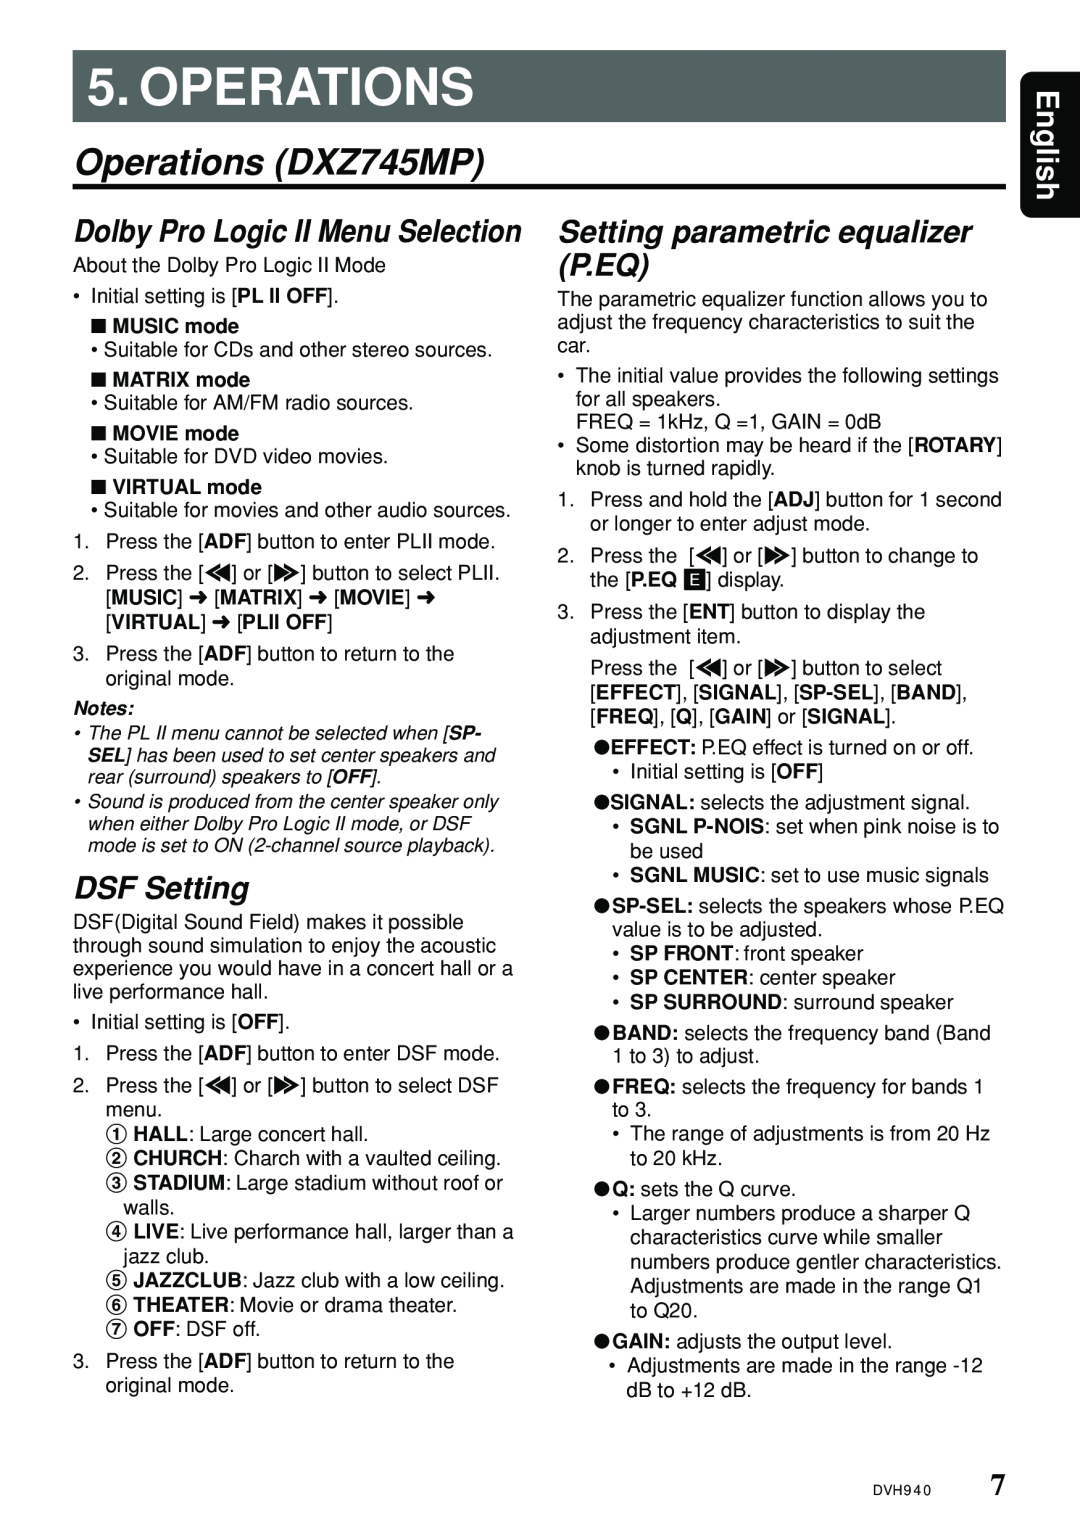 Clarion DVH940N owner manual Operations DXZ745MP, English, Dolby Pro Logic II Menu Selection 